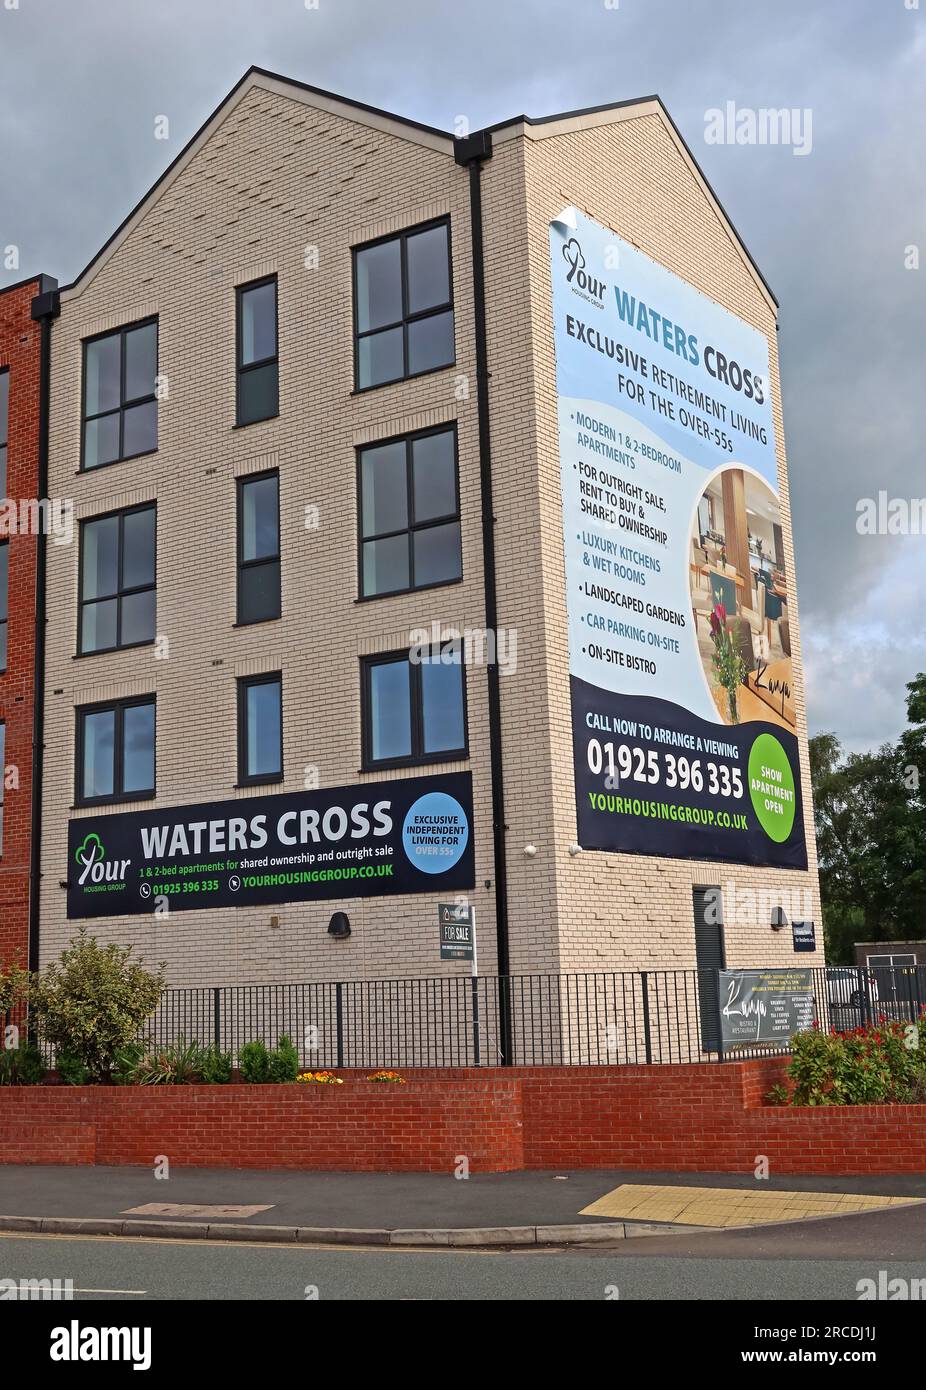 Your Housing Group, Waters Cross Shared ownership retirement living development, Watling St, Northwich, Cheshire, England, UK,  CW9 5EX Stock Photo